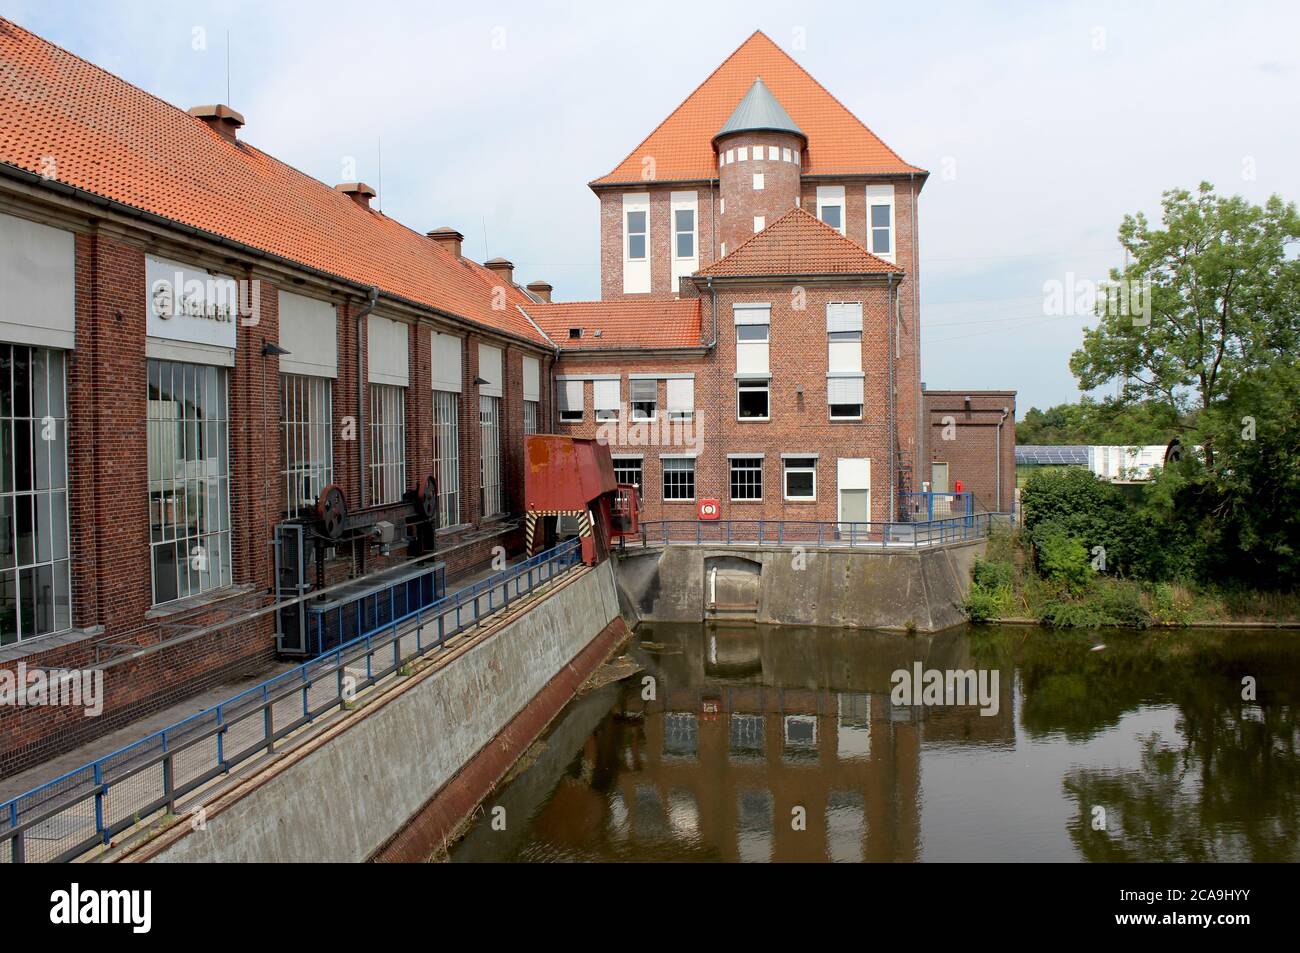 DÖRVERDEN, GERMANY, 19 JULY 2020: The  Statkraft Hydro electric Power station on the Weser river. It is the oldest run-of-river power station in Lower Stock Photo